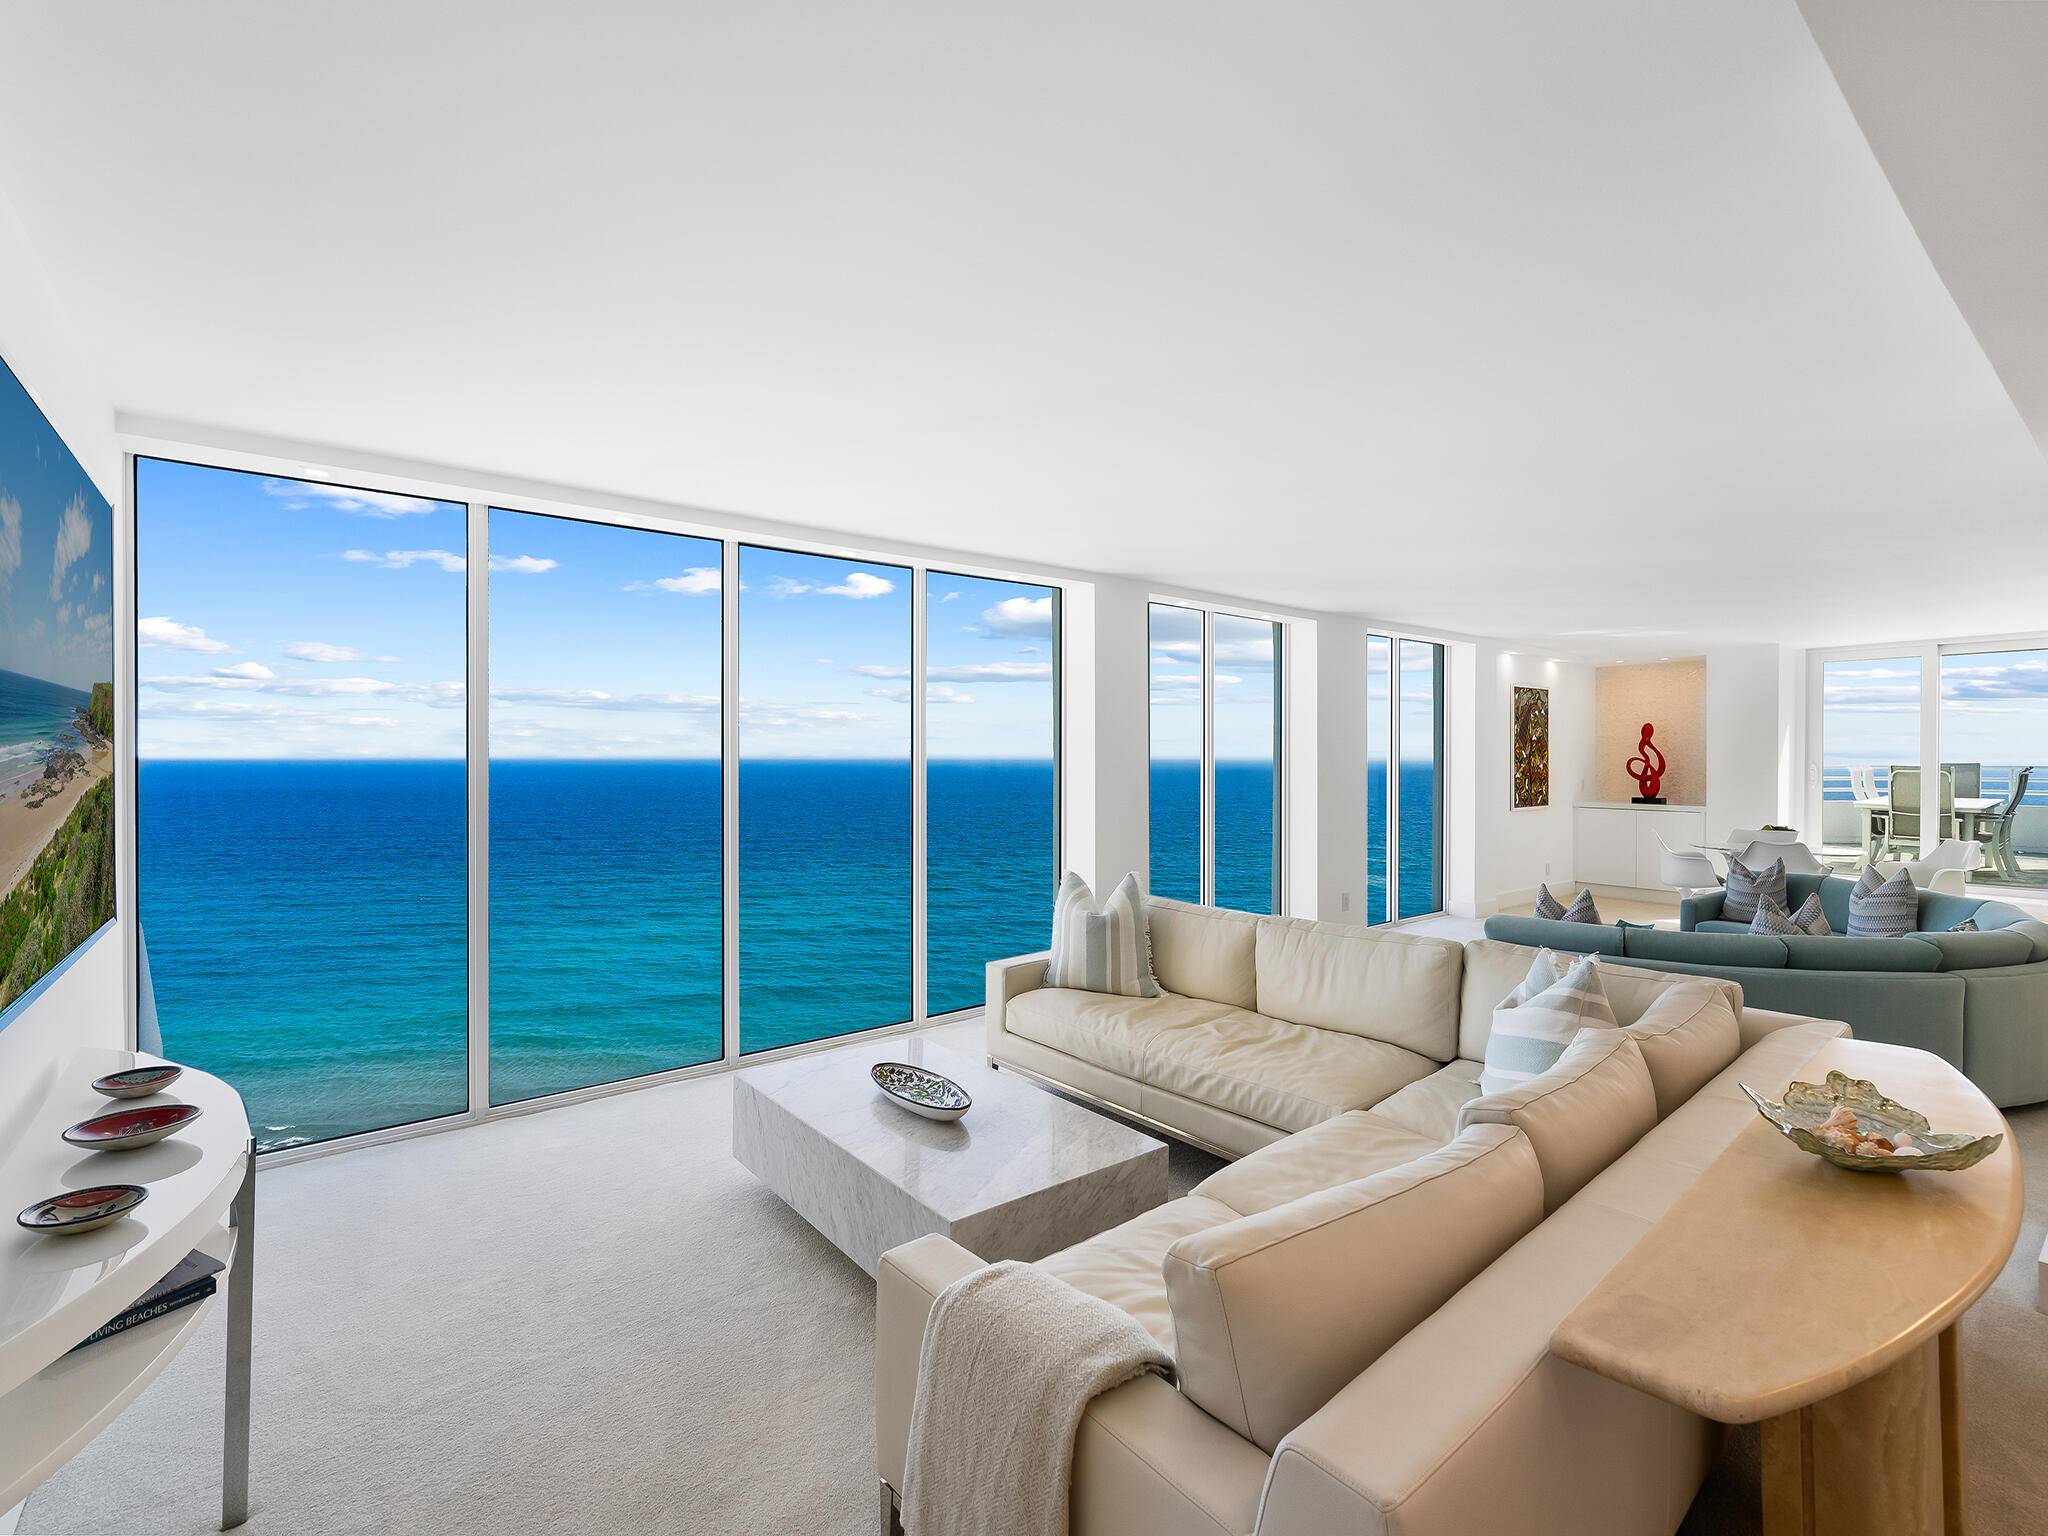 This remarkable SE corner bi level penthouse, nestled on the sand, boasts an expansive private rooftop terrace that offers unparalleled views.